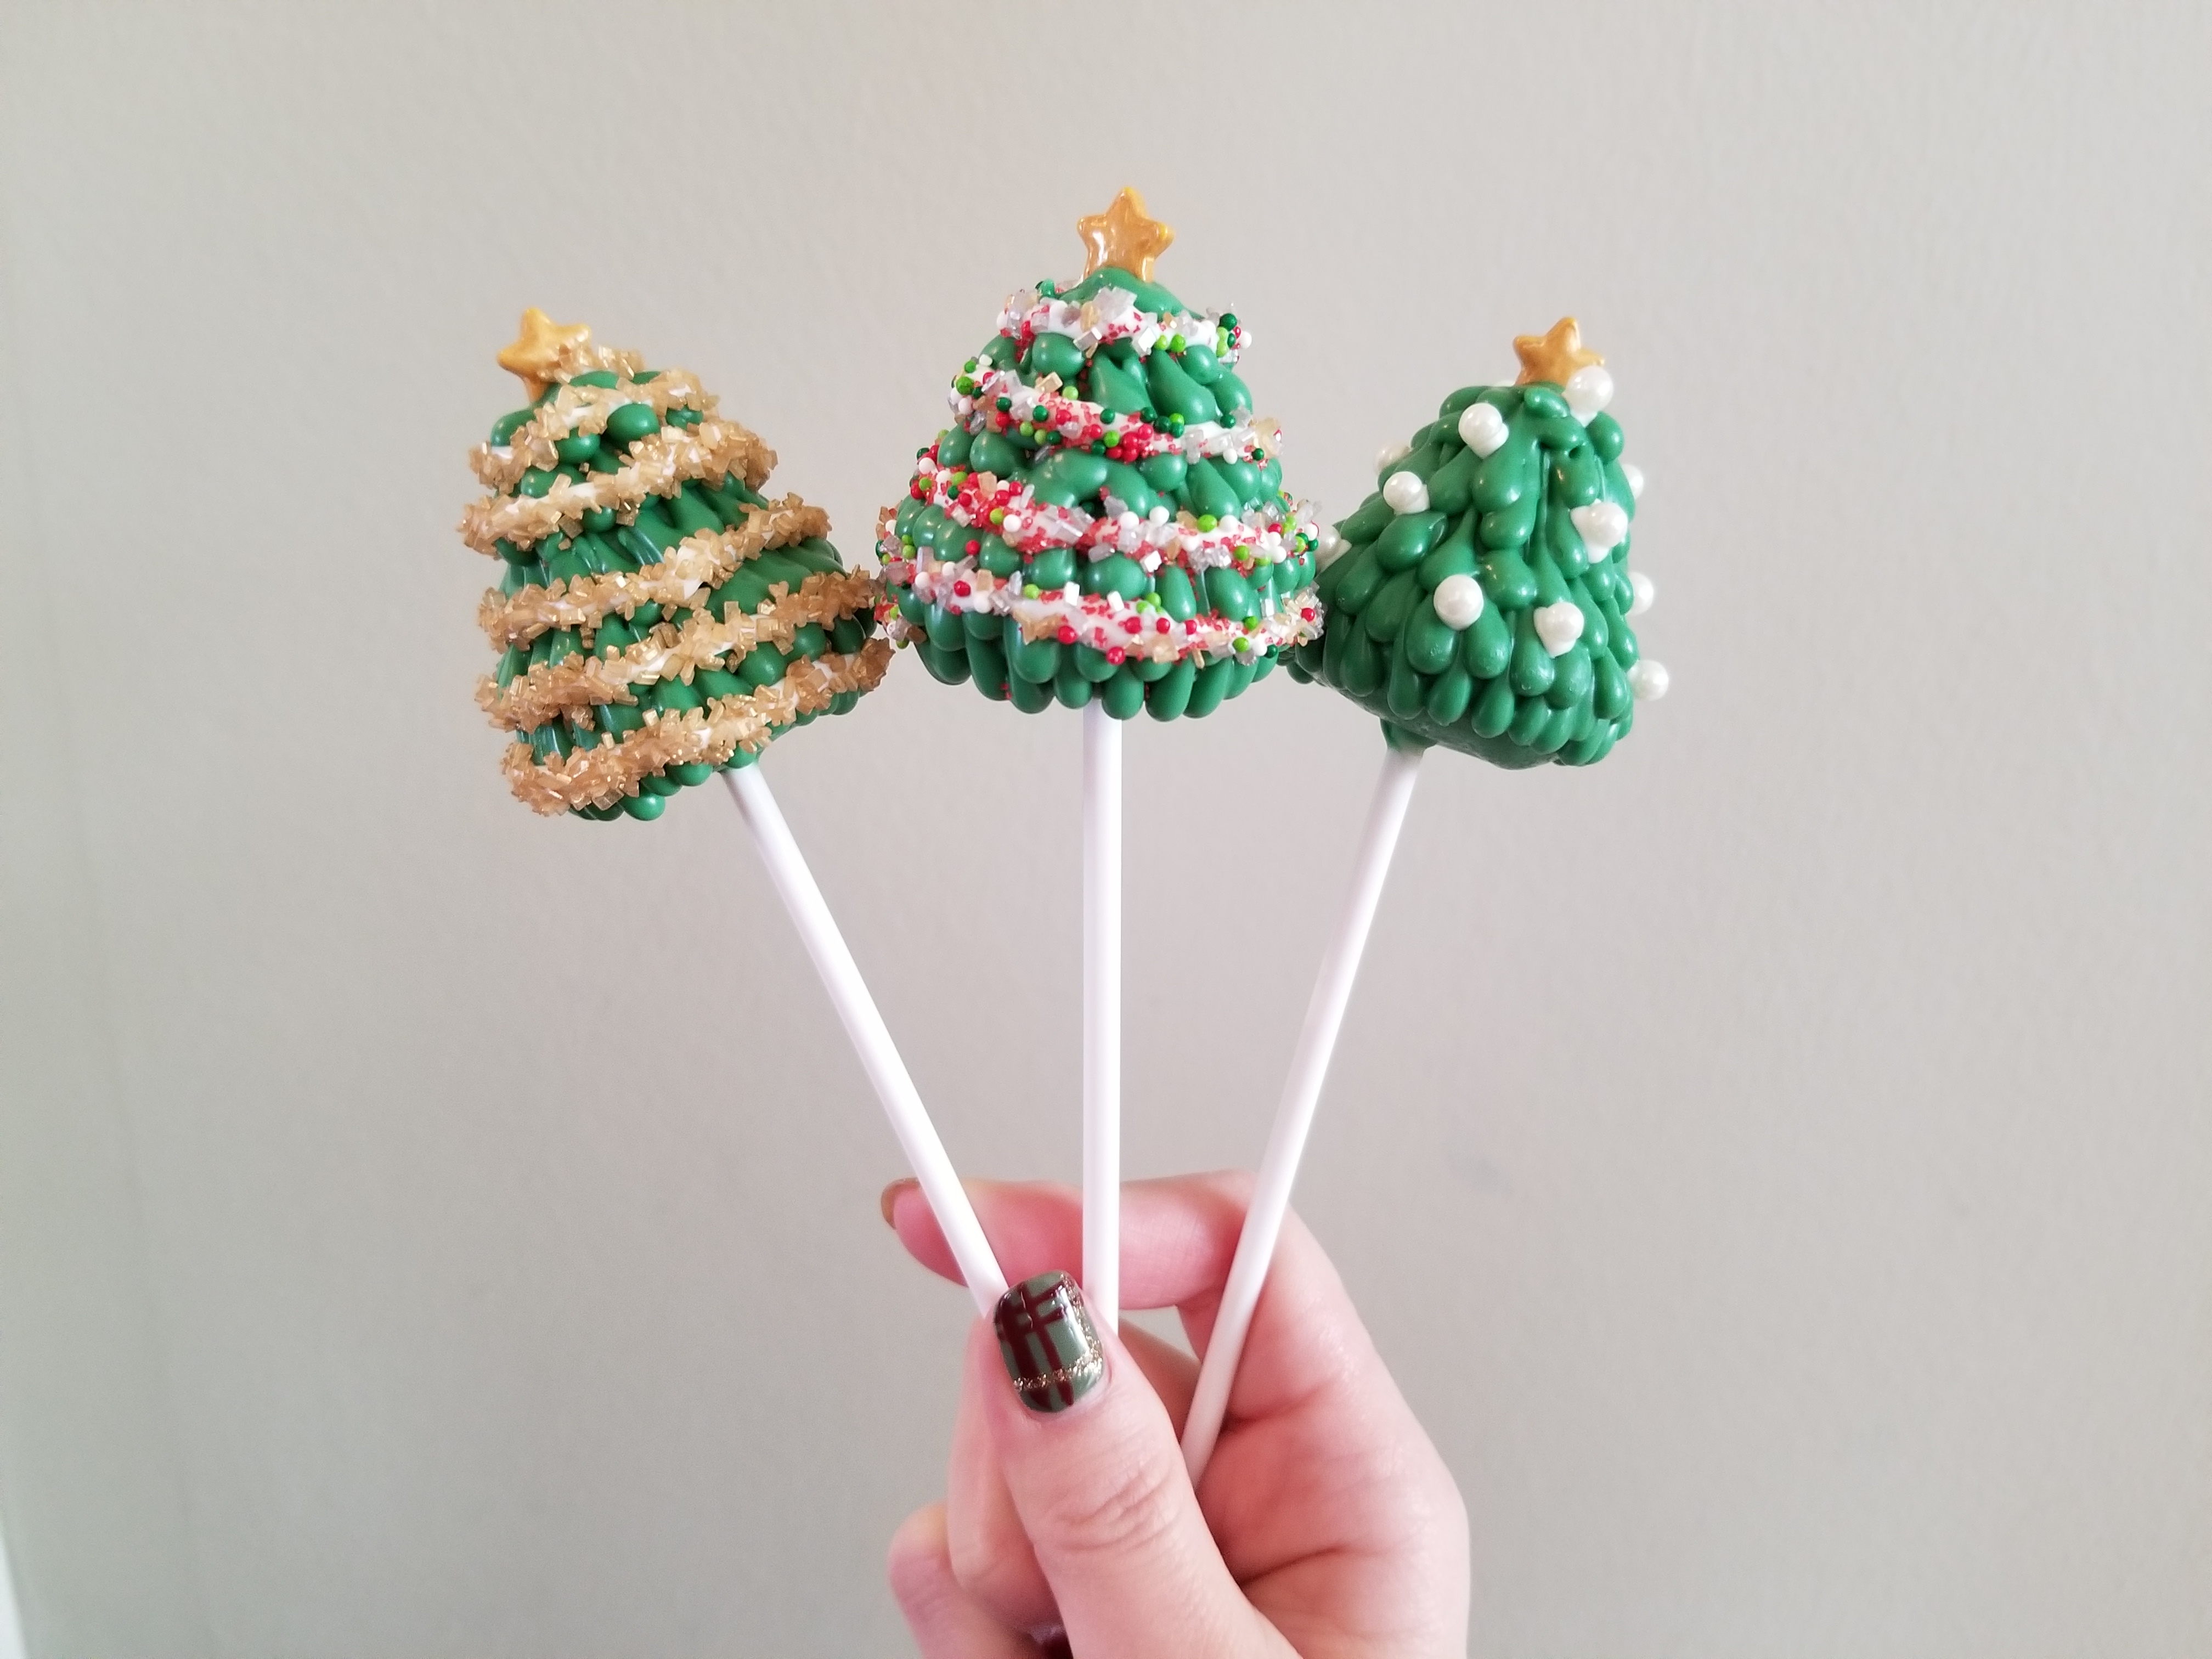 In front of a white background a woman with green painted nails holds three Christmas tree cake pops. They are decorated with sprinkles to resemble a string of light around them. Starting from the left on has gold sprinkles, red/green/white nonpareils and finally individually placed pearl sprinkles.